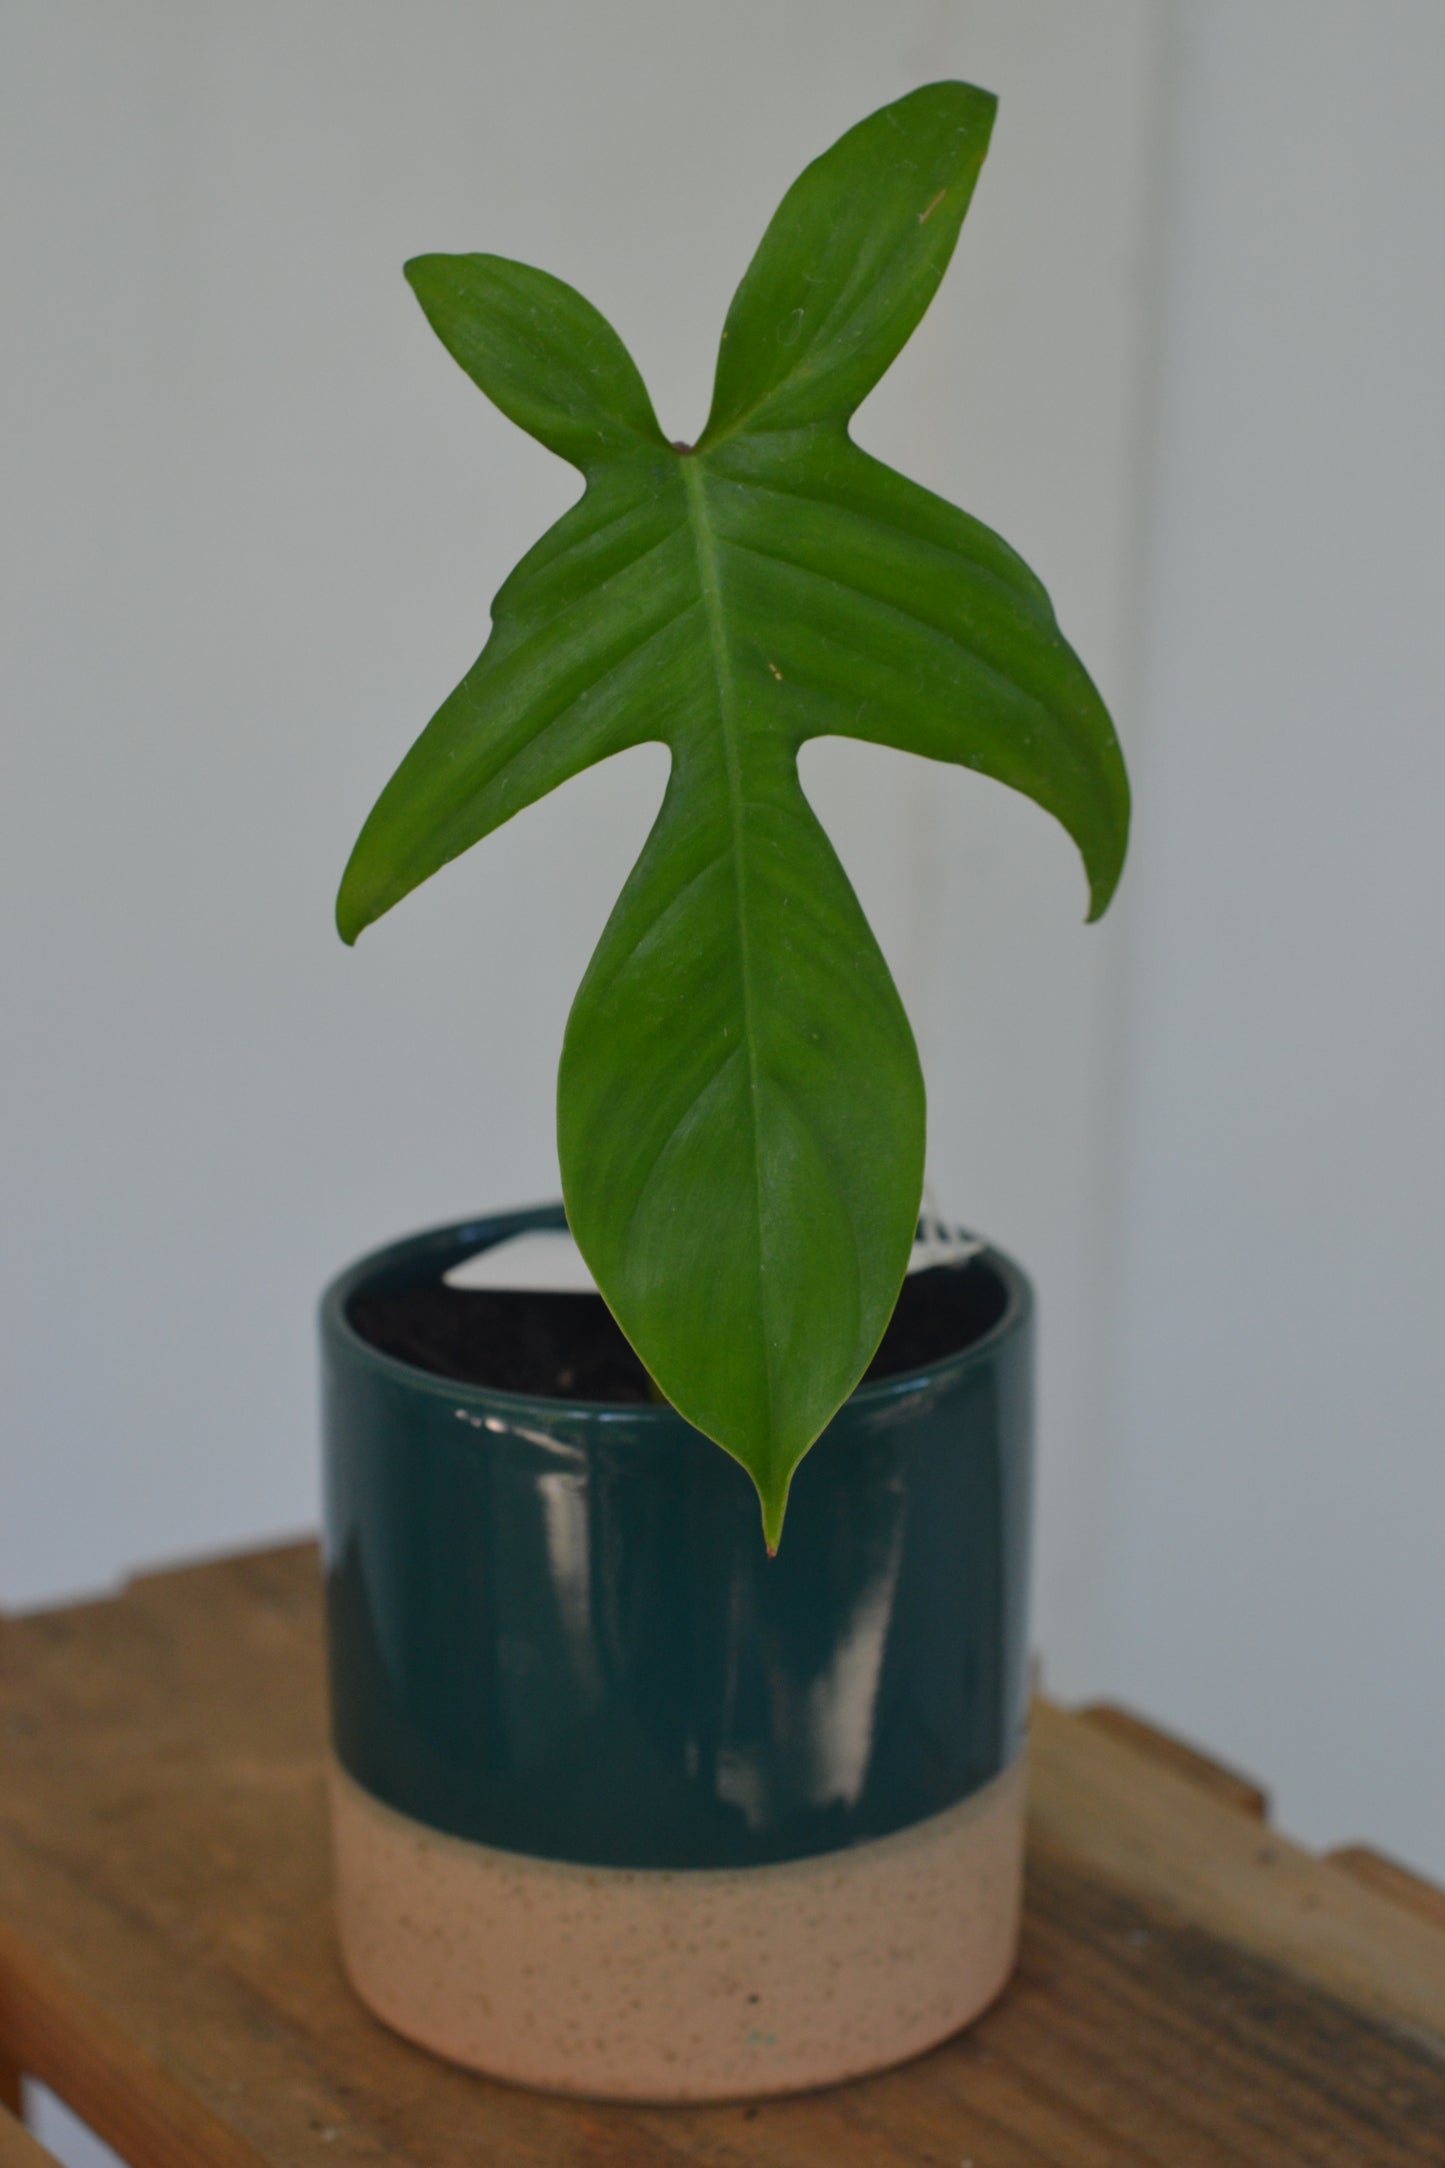 Planted Rooted Philodendron “Florida green” cutting. Ceramic planter